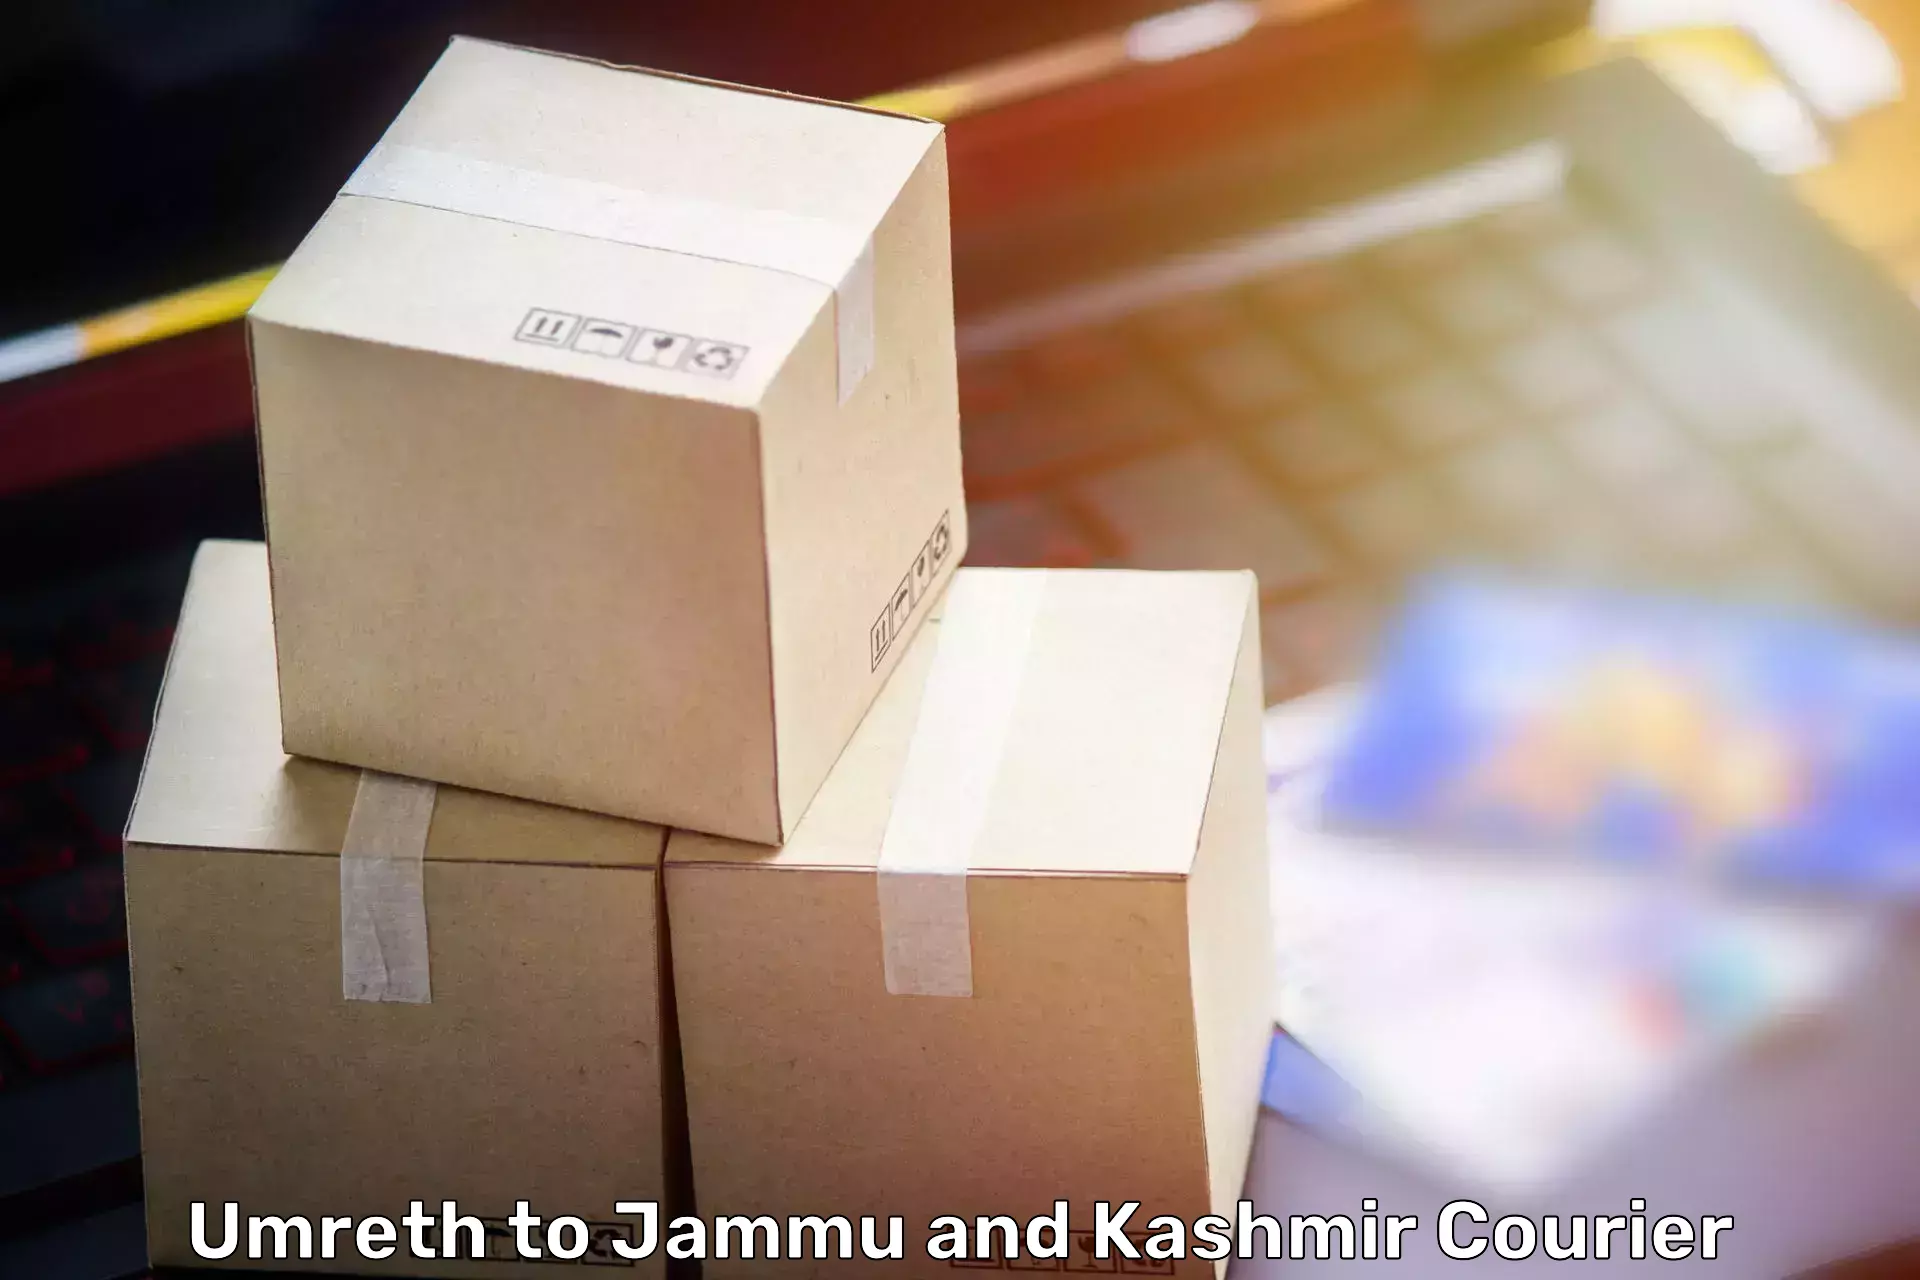 Comprehensive relocation services in Umreth to Kulgam